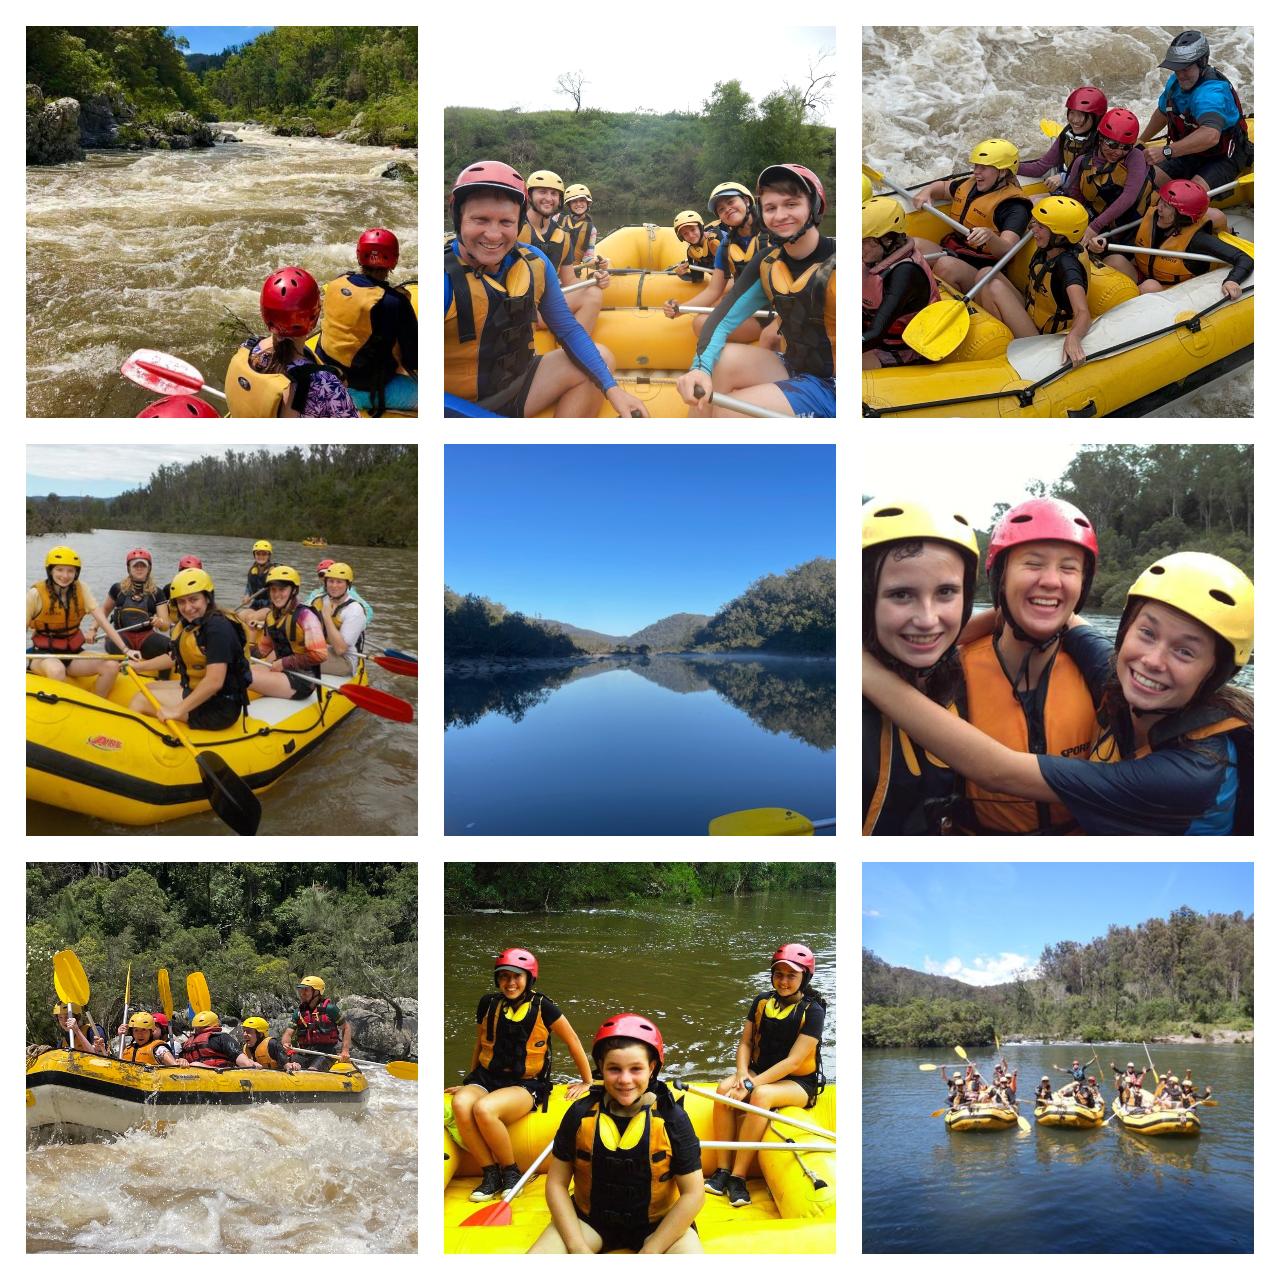 Family-friendly Whitewater Rafting - DAY TRIP - Includes Meals 